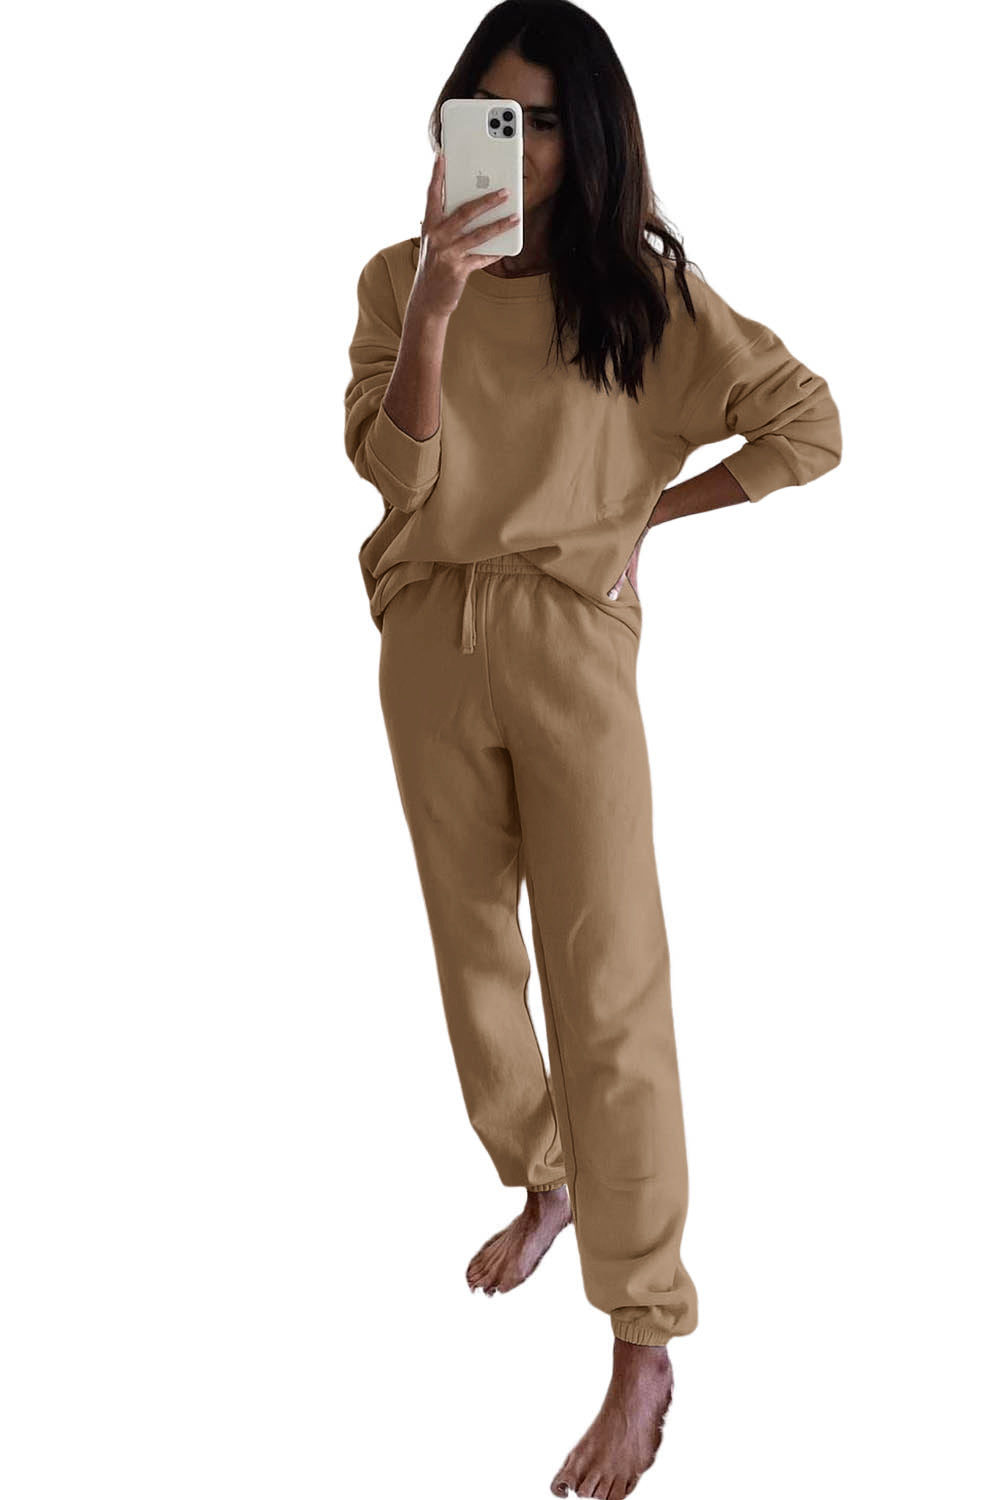 Flaxen Long Sleeve Top and Drawstring Pants Lounge Outfit Loungewear JT's Designer Fashion